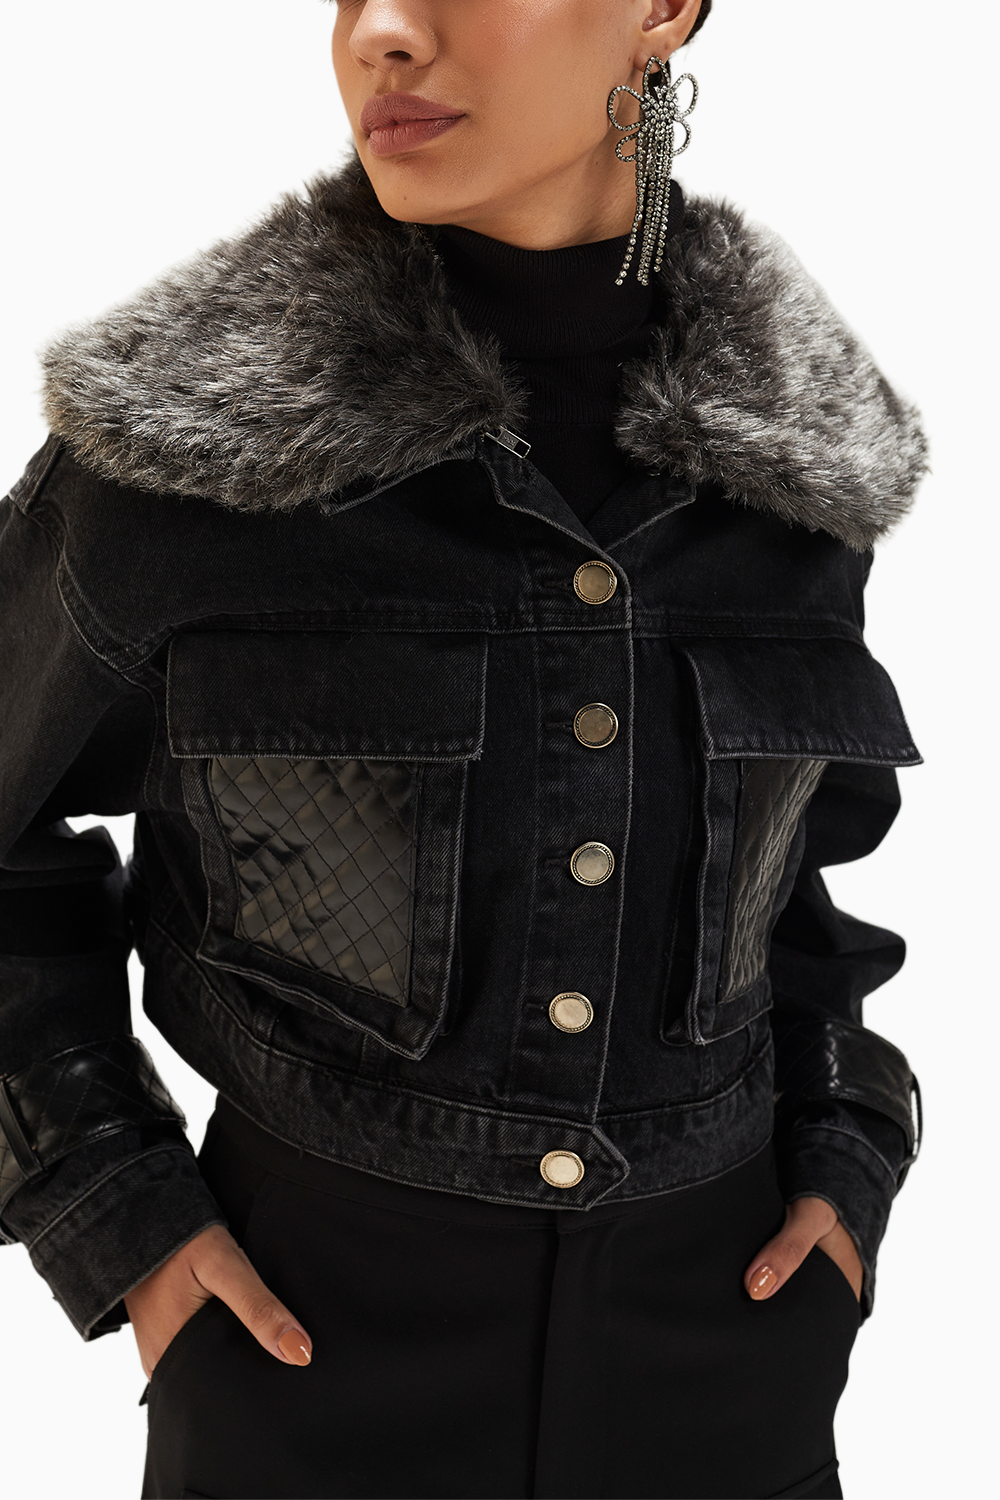 Black Denim Jacket With Fur Collar And Faux Leather Detail